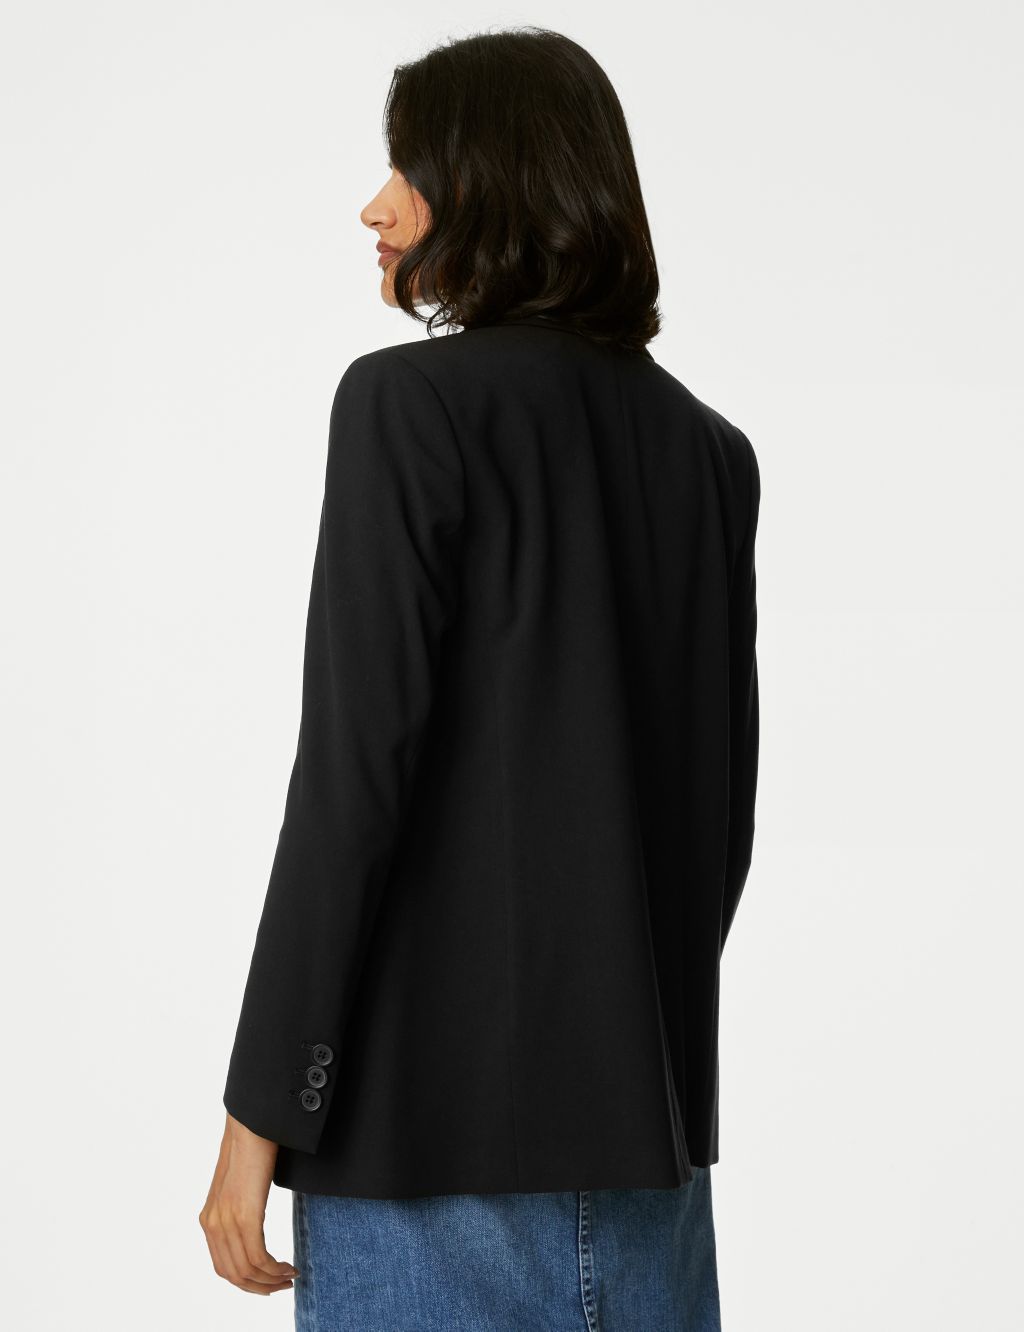 Relaxed Single Breasted Blazer | M&S Collection | M&S